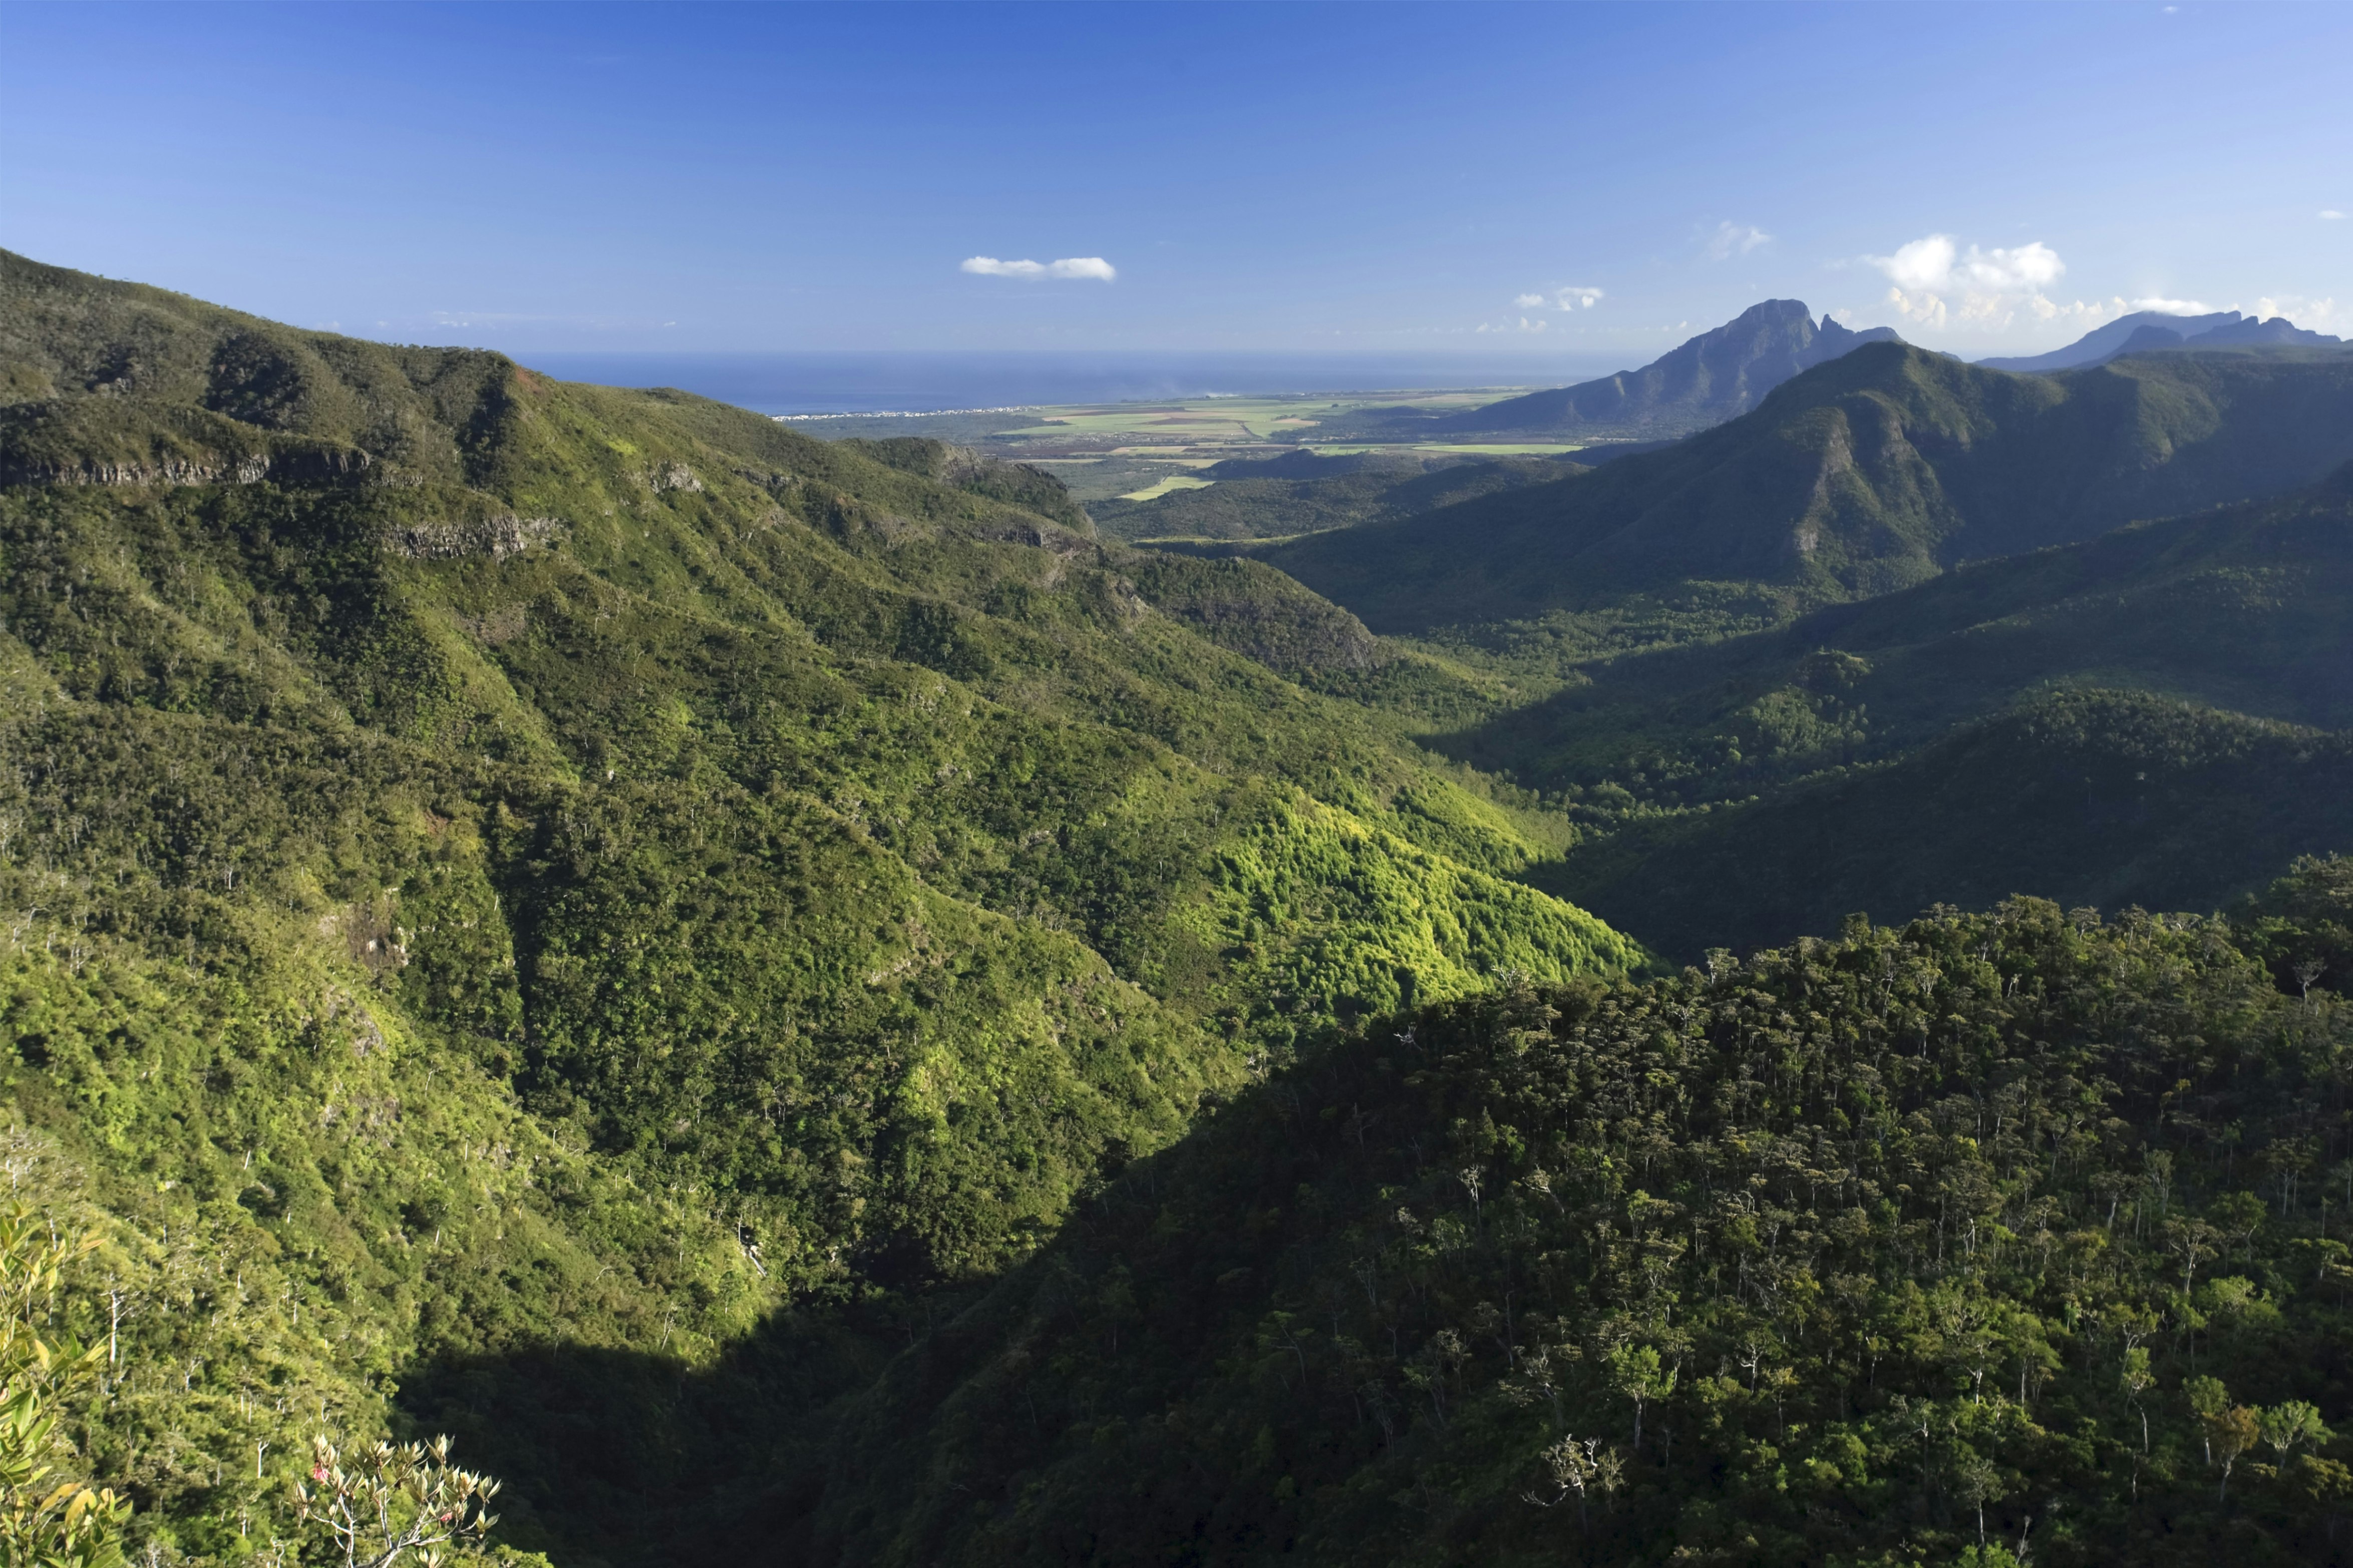 Mauritius, Black River Gorges National Park, Scenic view of mountains